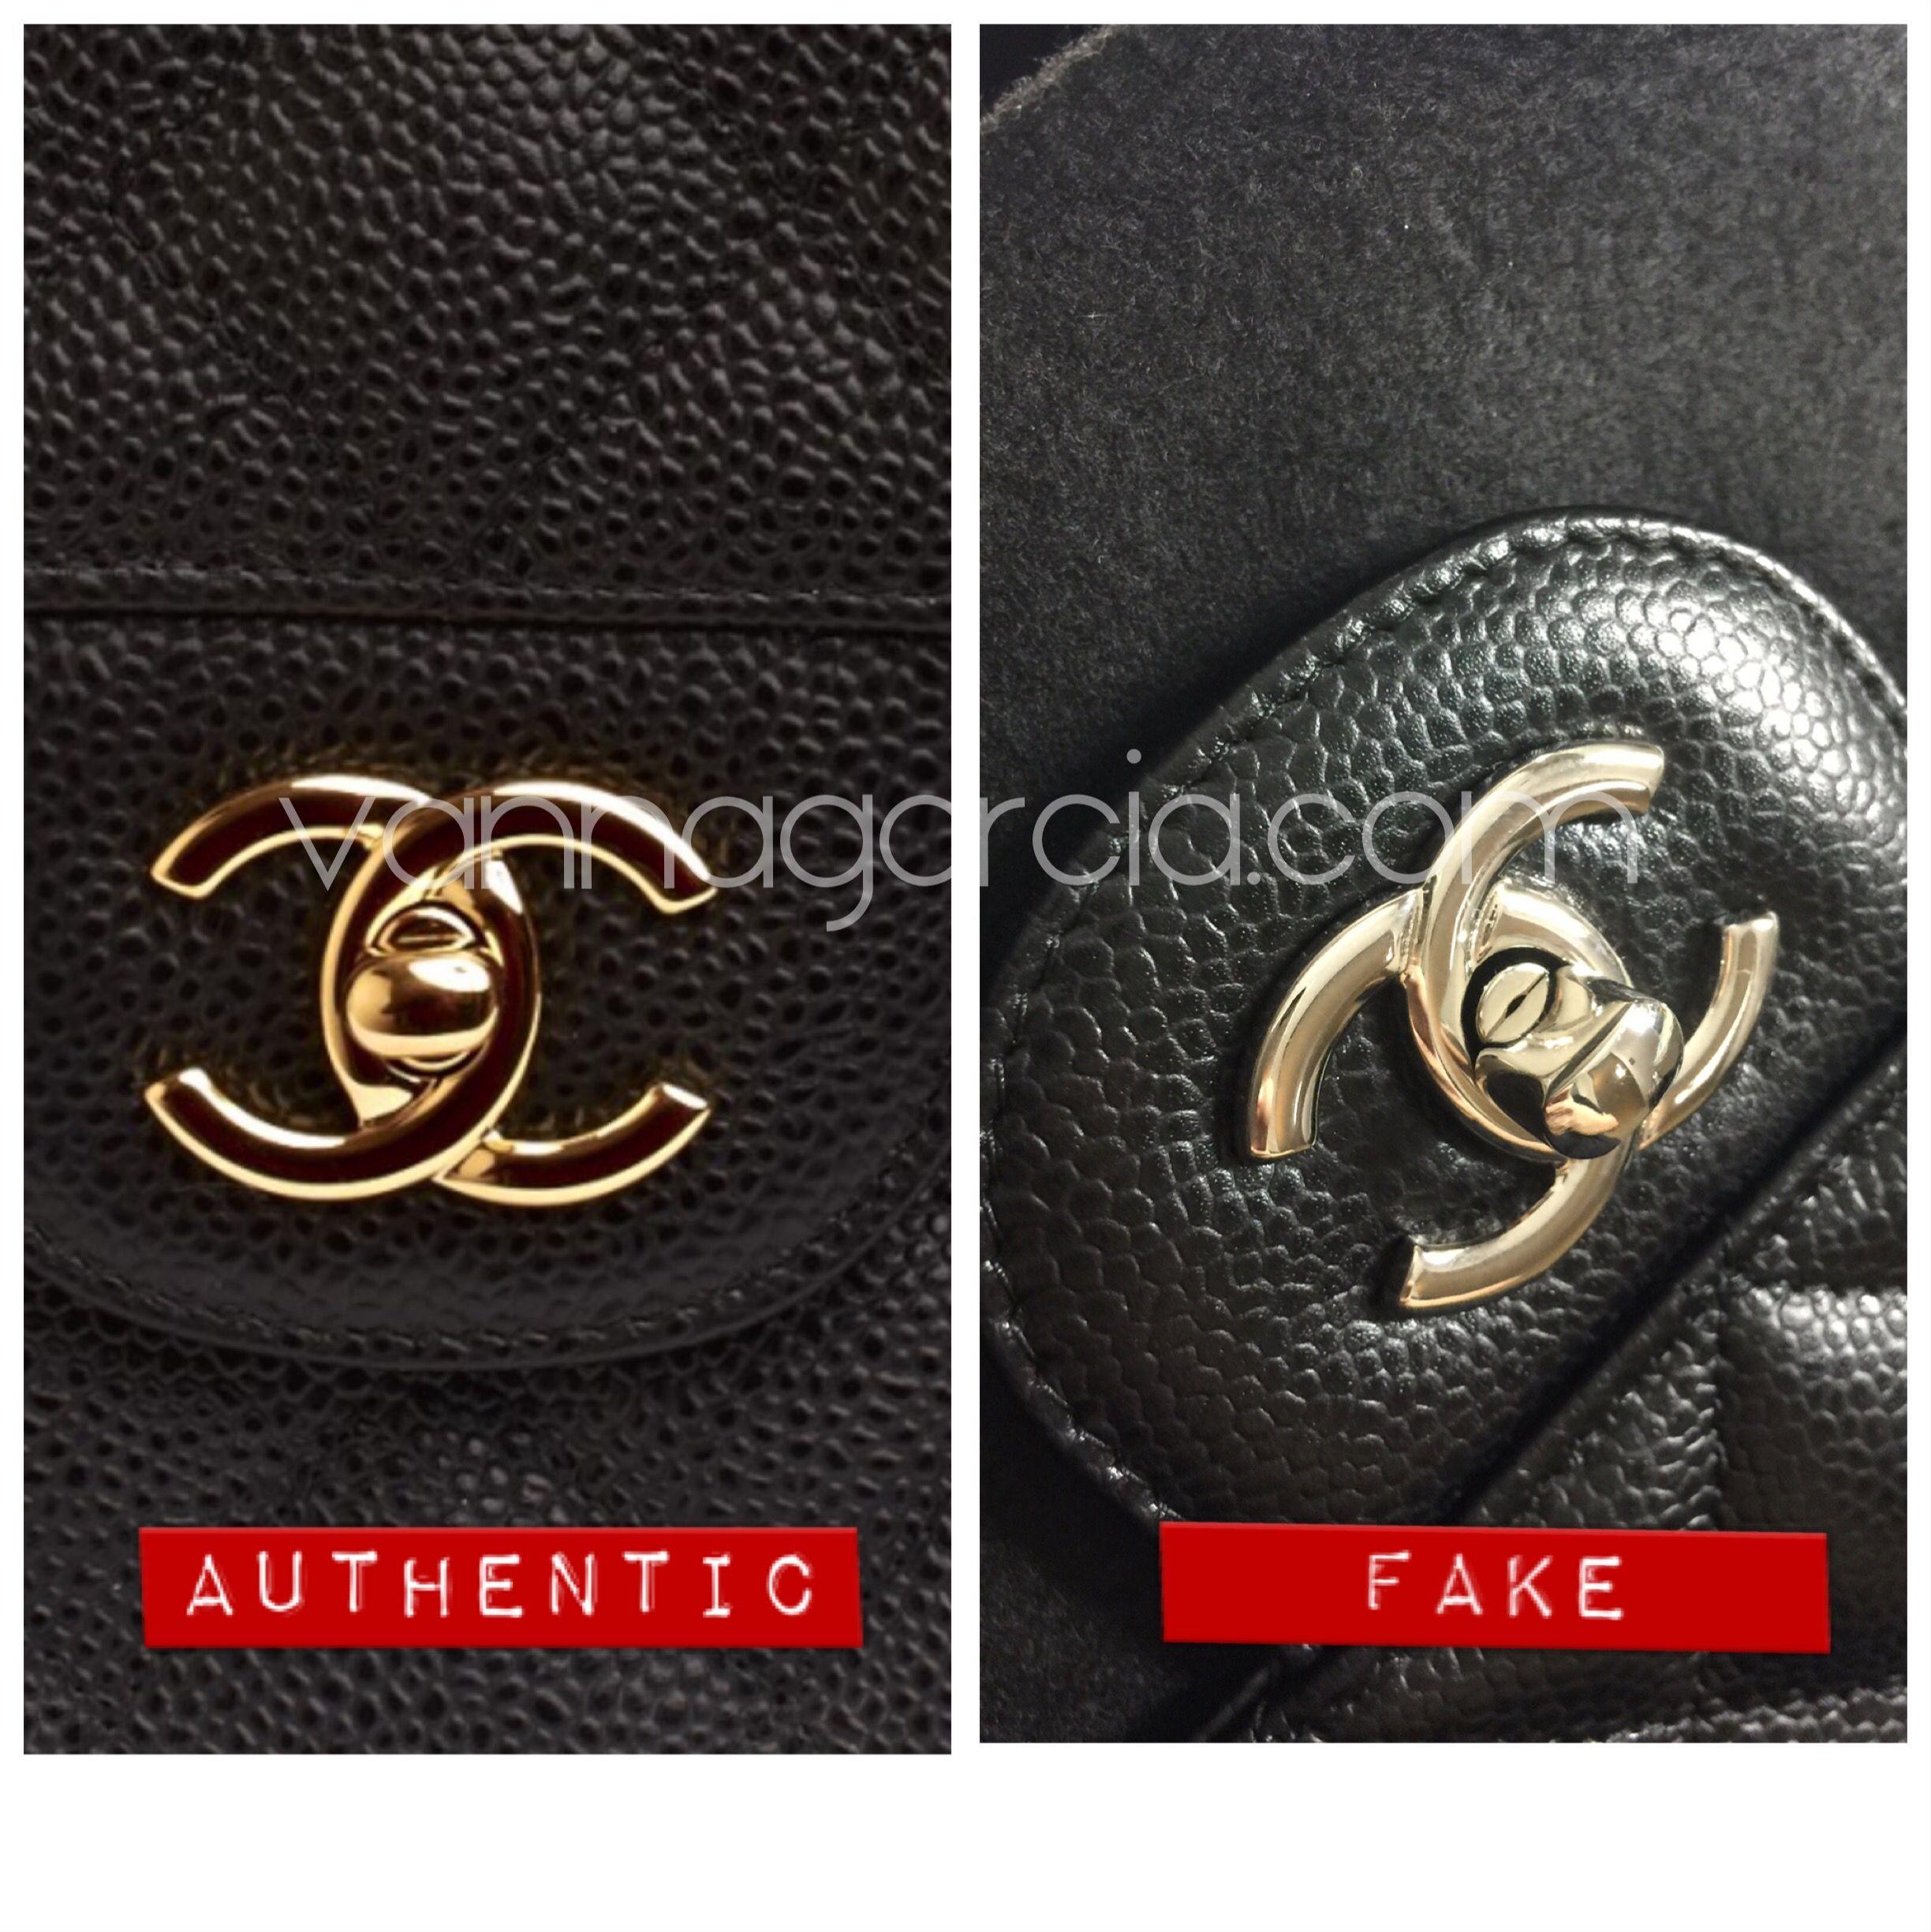 Fake Chanel Logo - Some Tips to Find out Authenticity of Chanel Bags | Vanna Garcia